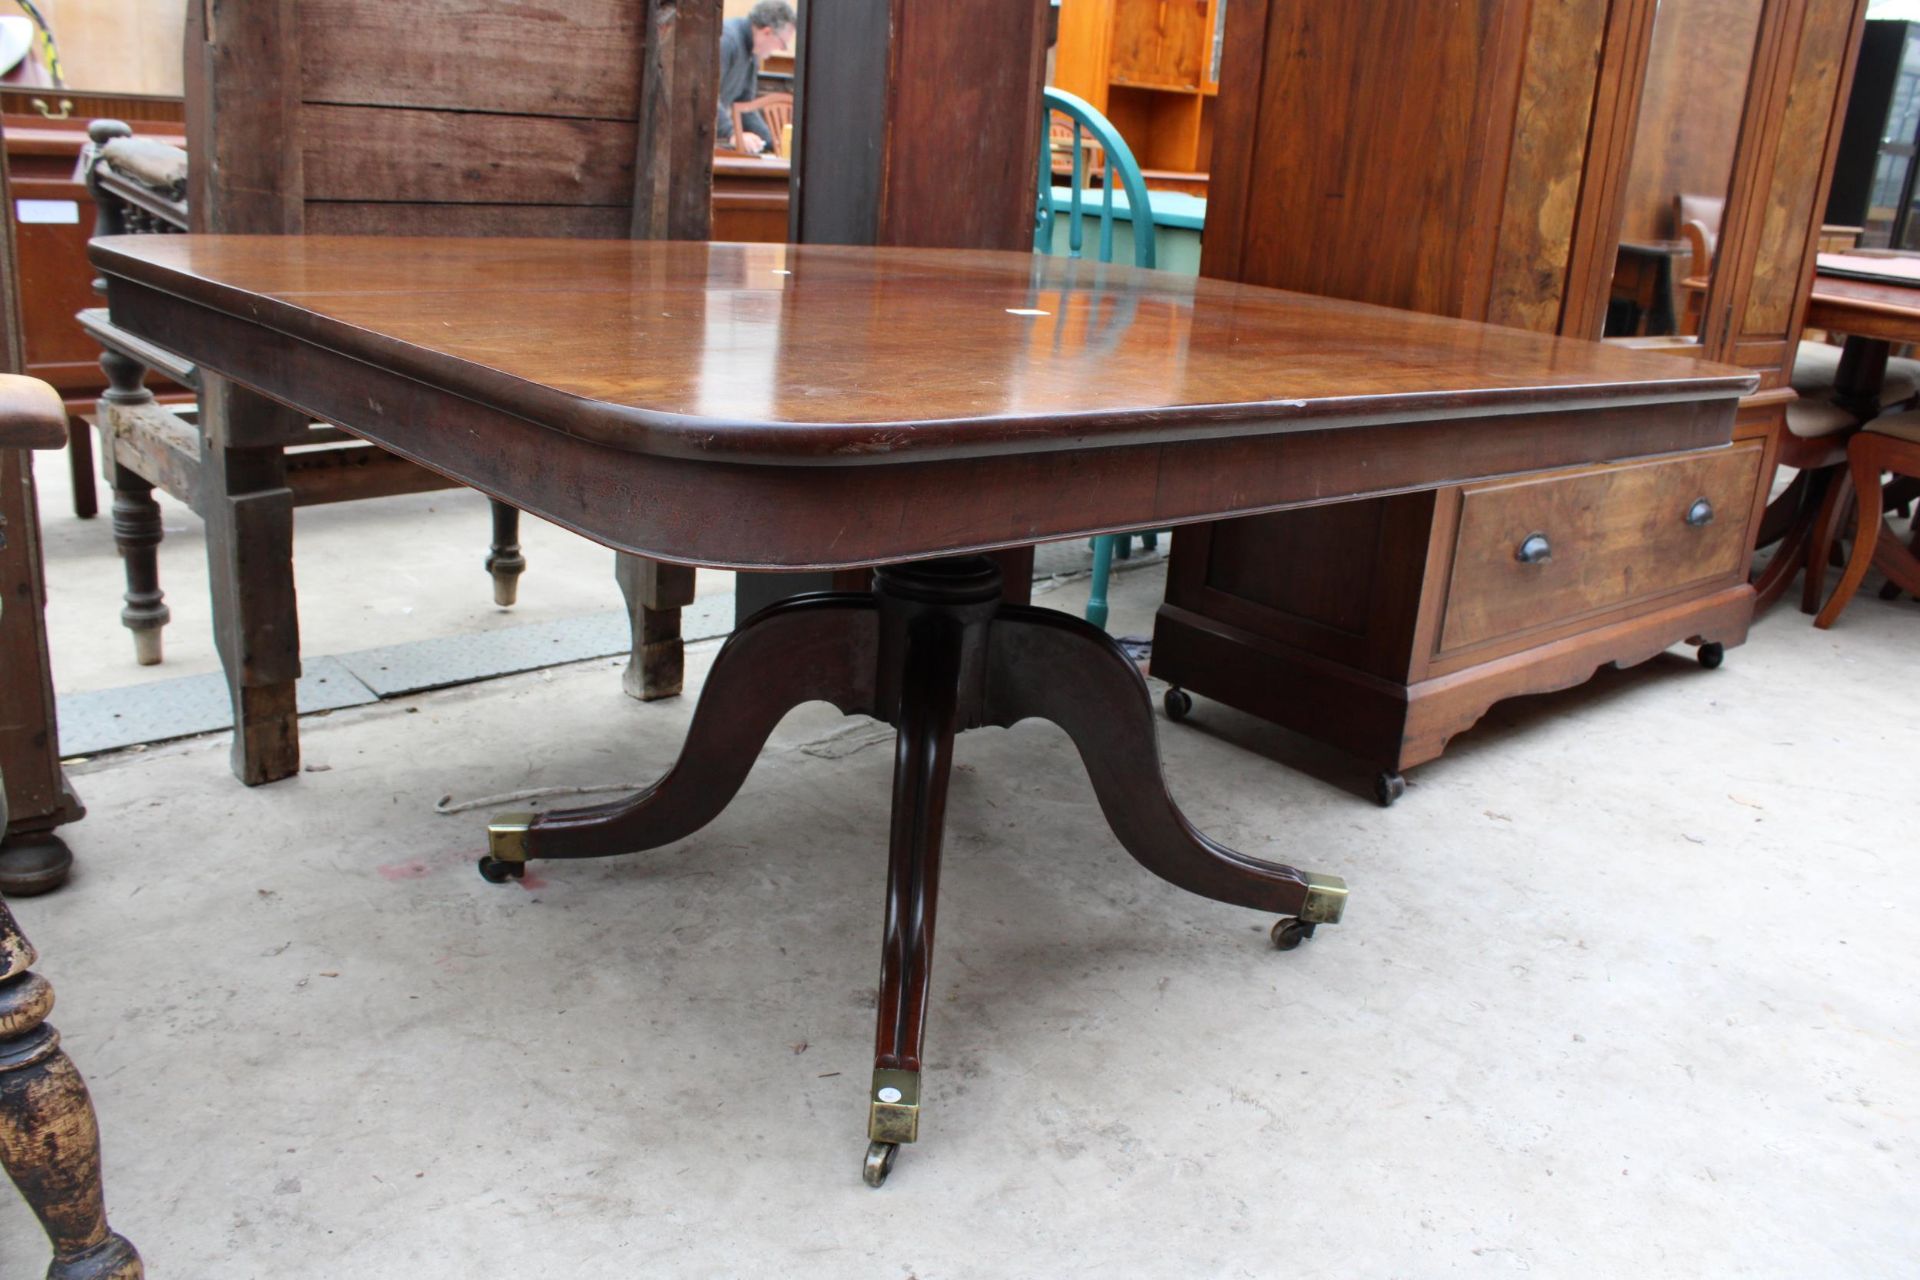 A REGENCY STYLE MAHOGANY PEDESTAL TILT-TOP DINING TABLE 56" X 46.5" WITH BRASS FEET AND CASTERS - Bild 2 aus 3